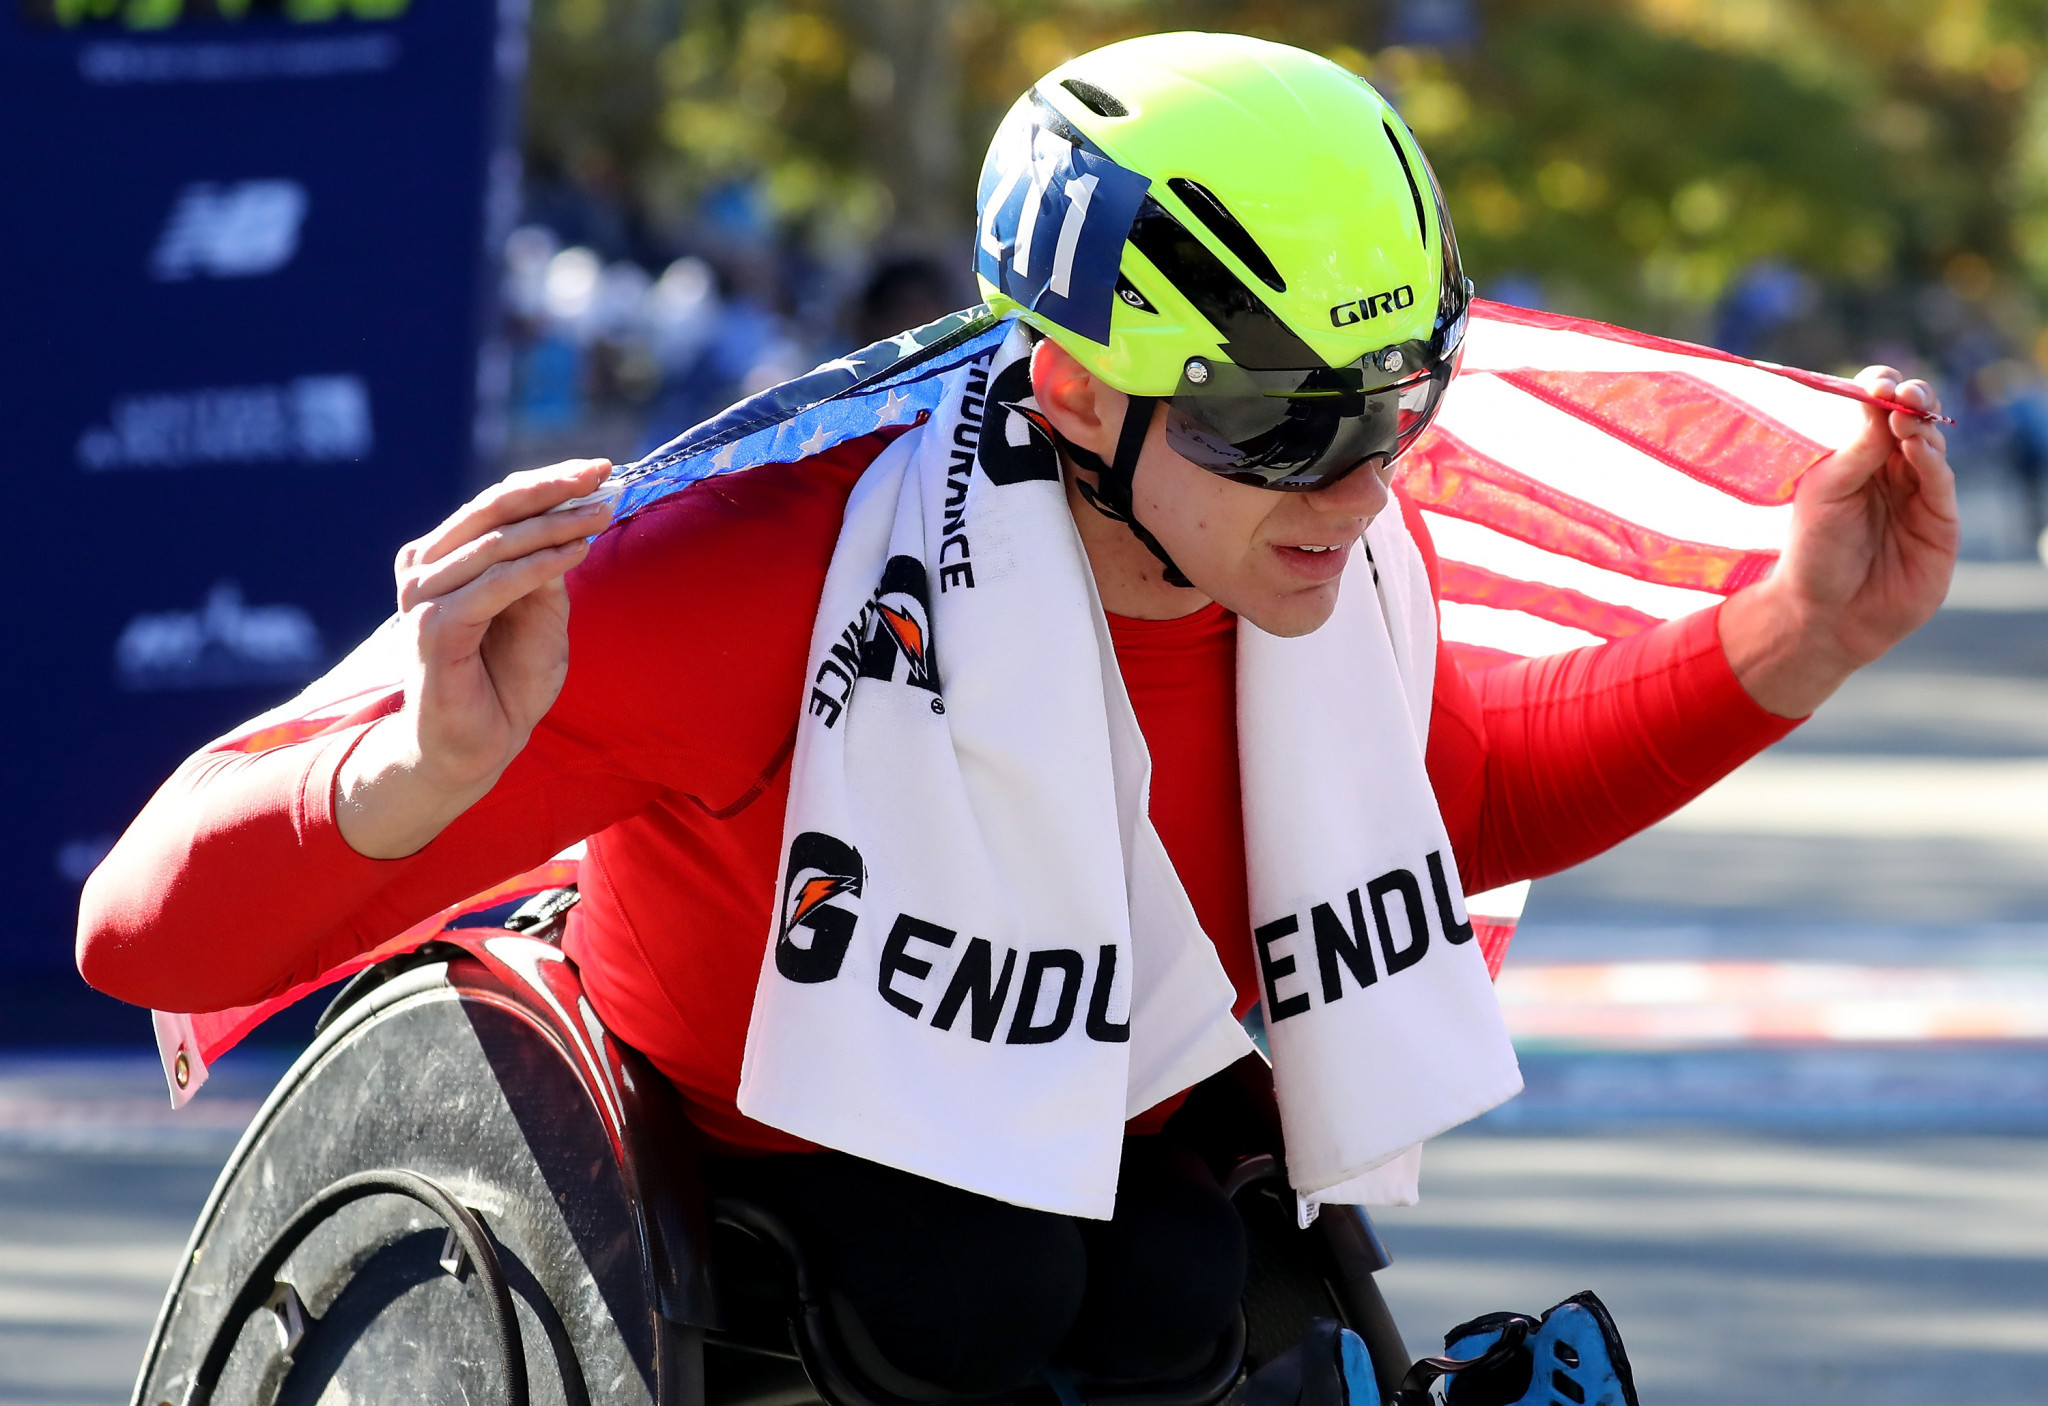 Daniel Romanchuk became the first-ever American and youngest athlete to win the men’s wheelchair event at the New York City Marathon today ©Getty Images